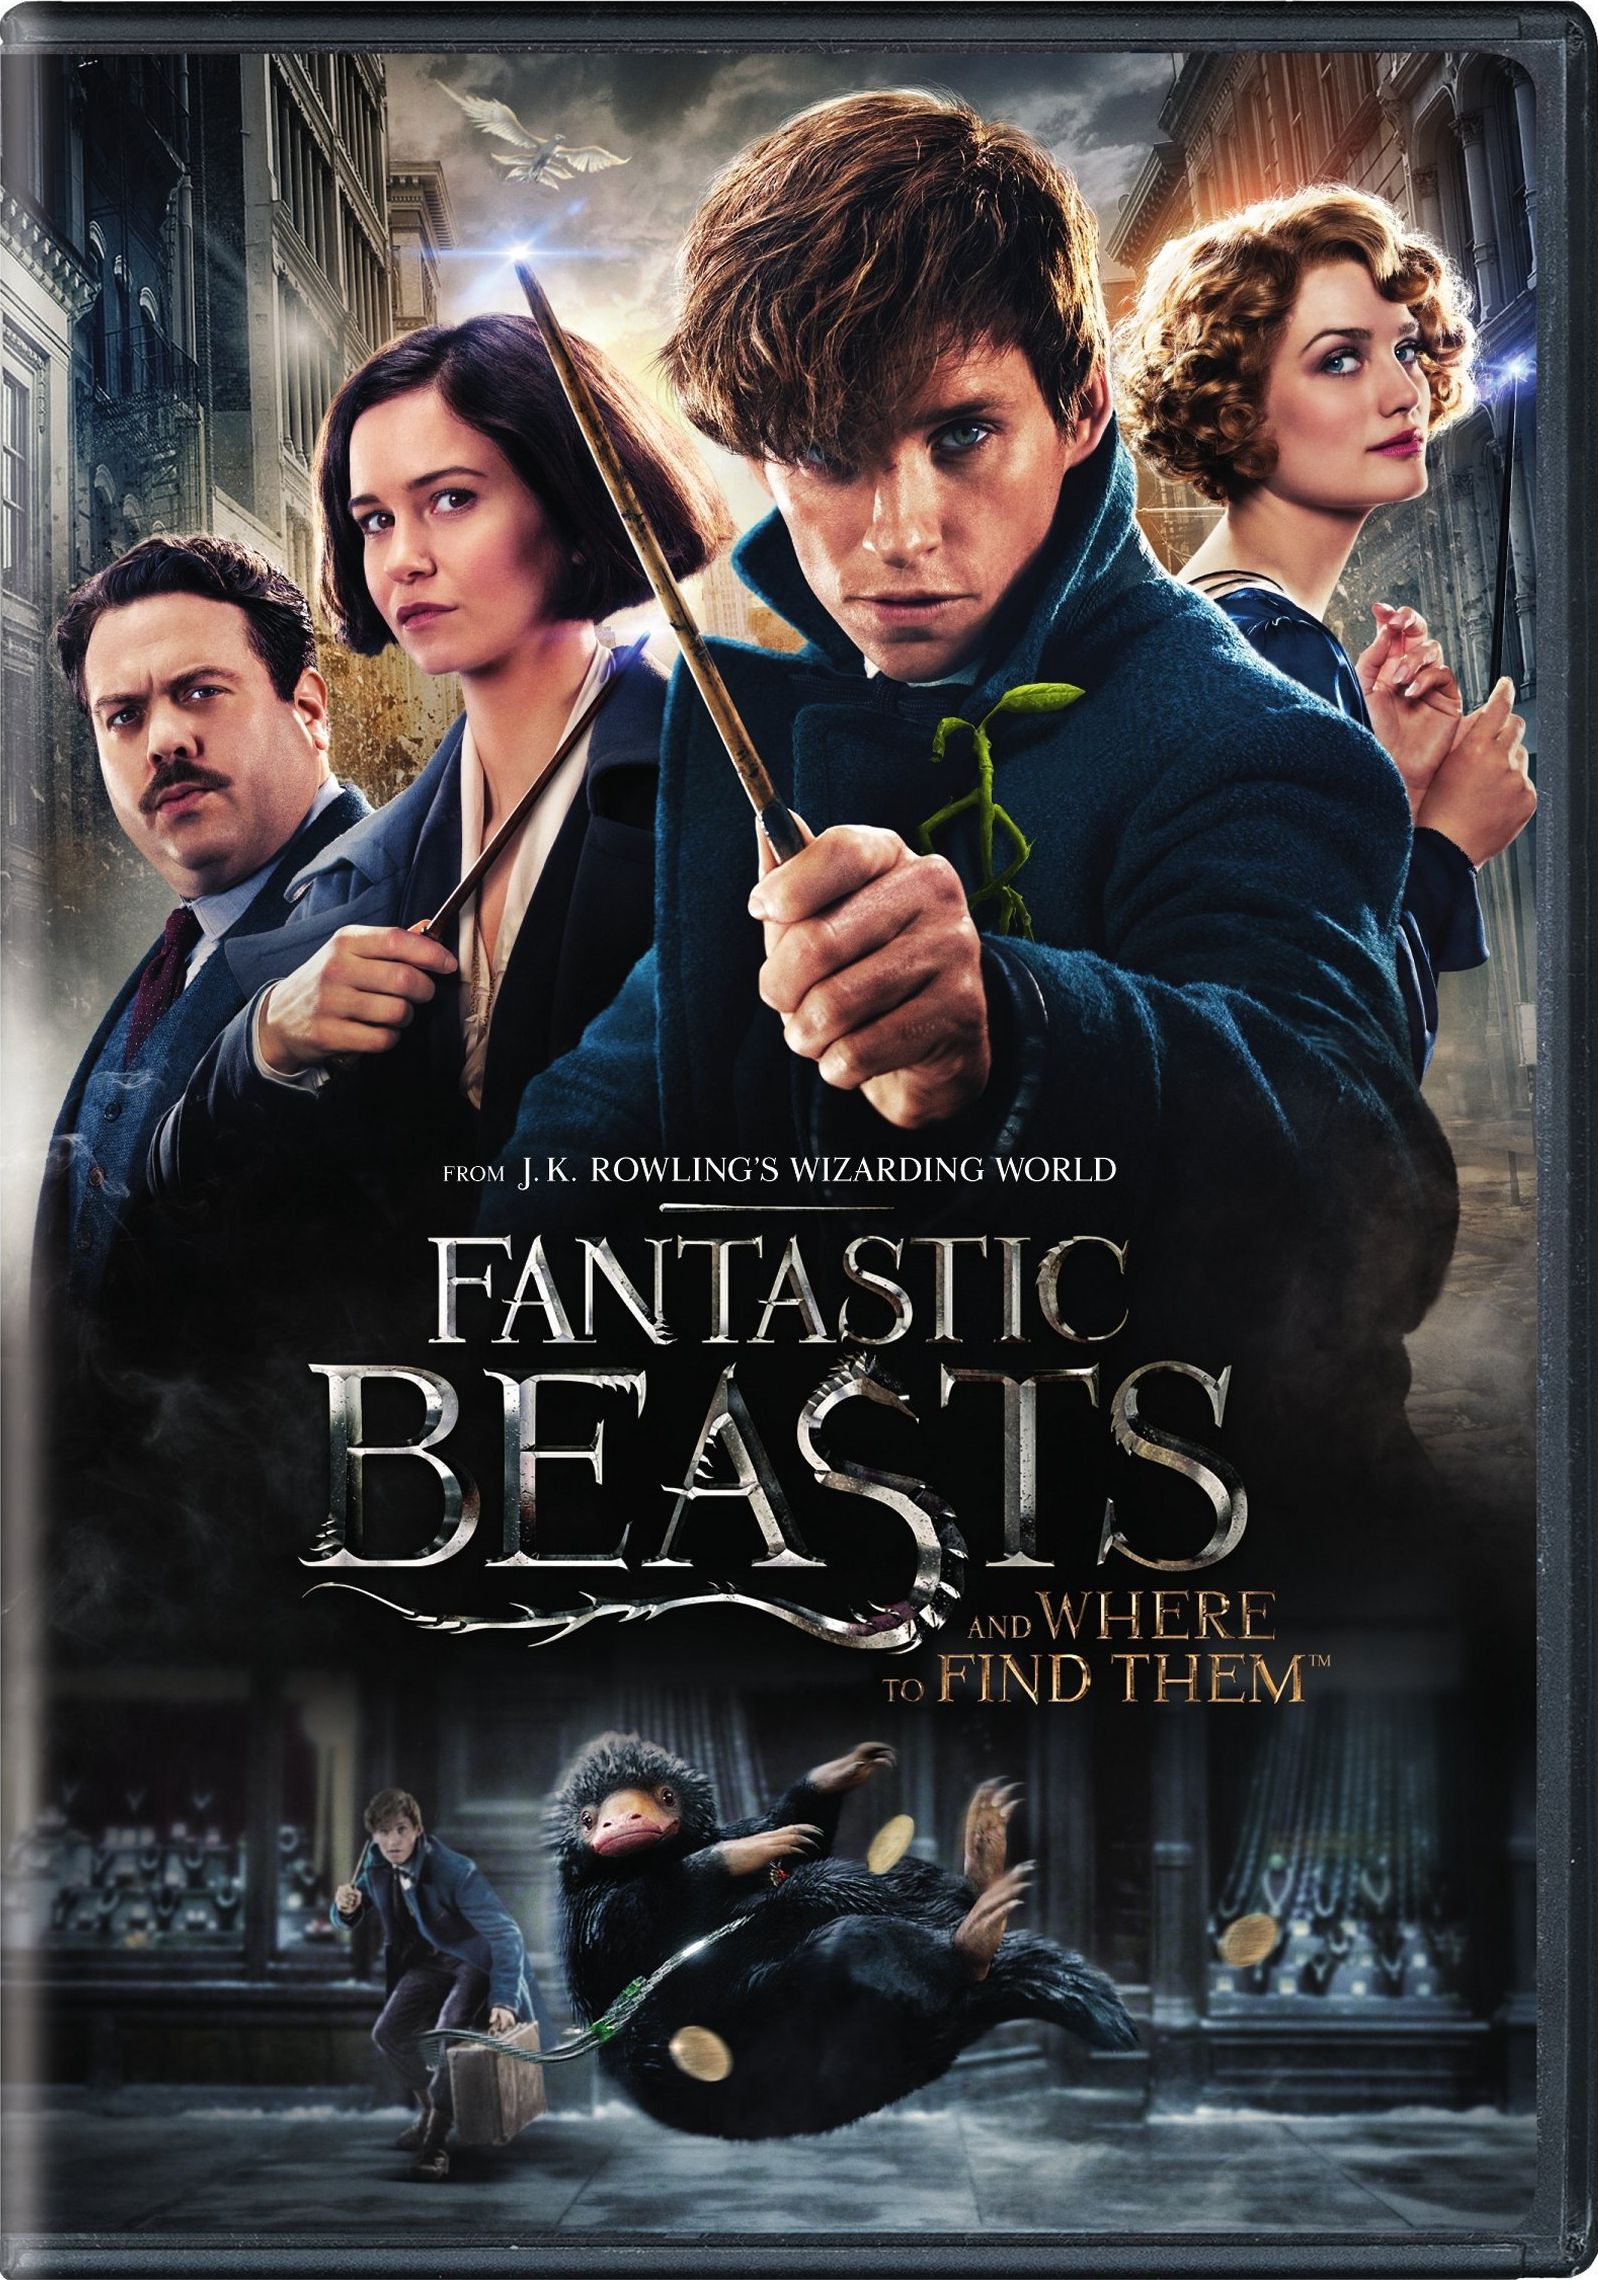 Fantastic Beasts and Where to Find Them DVD Release Date 